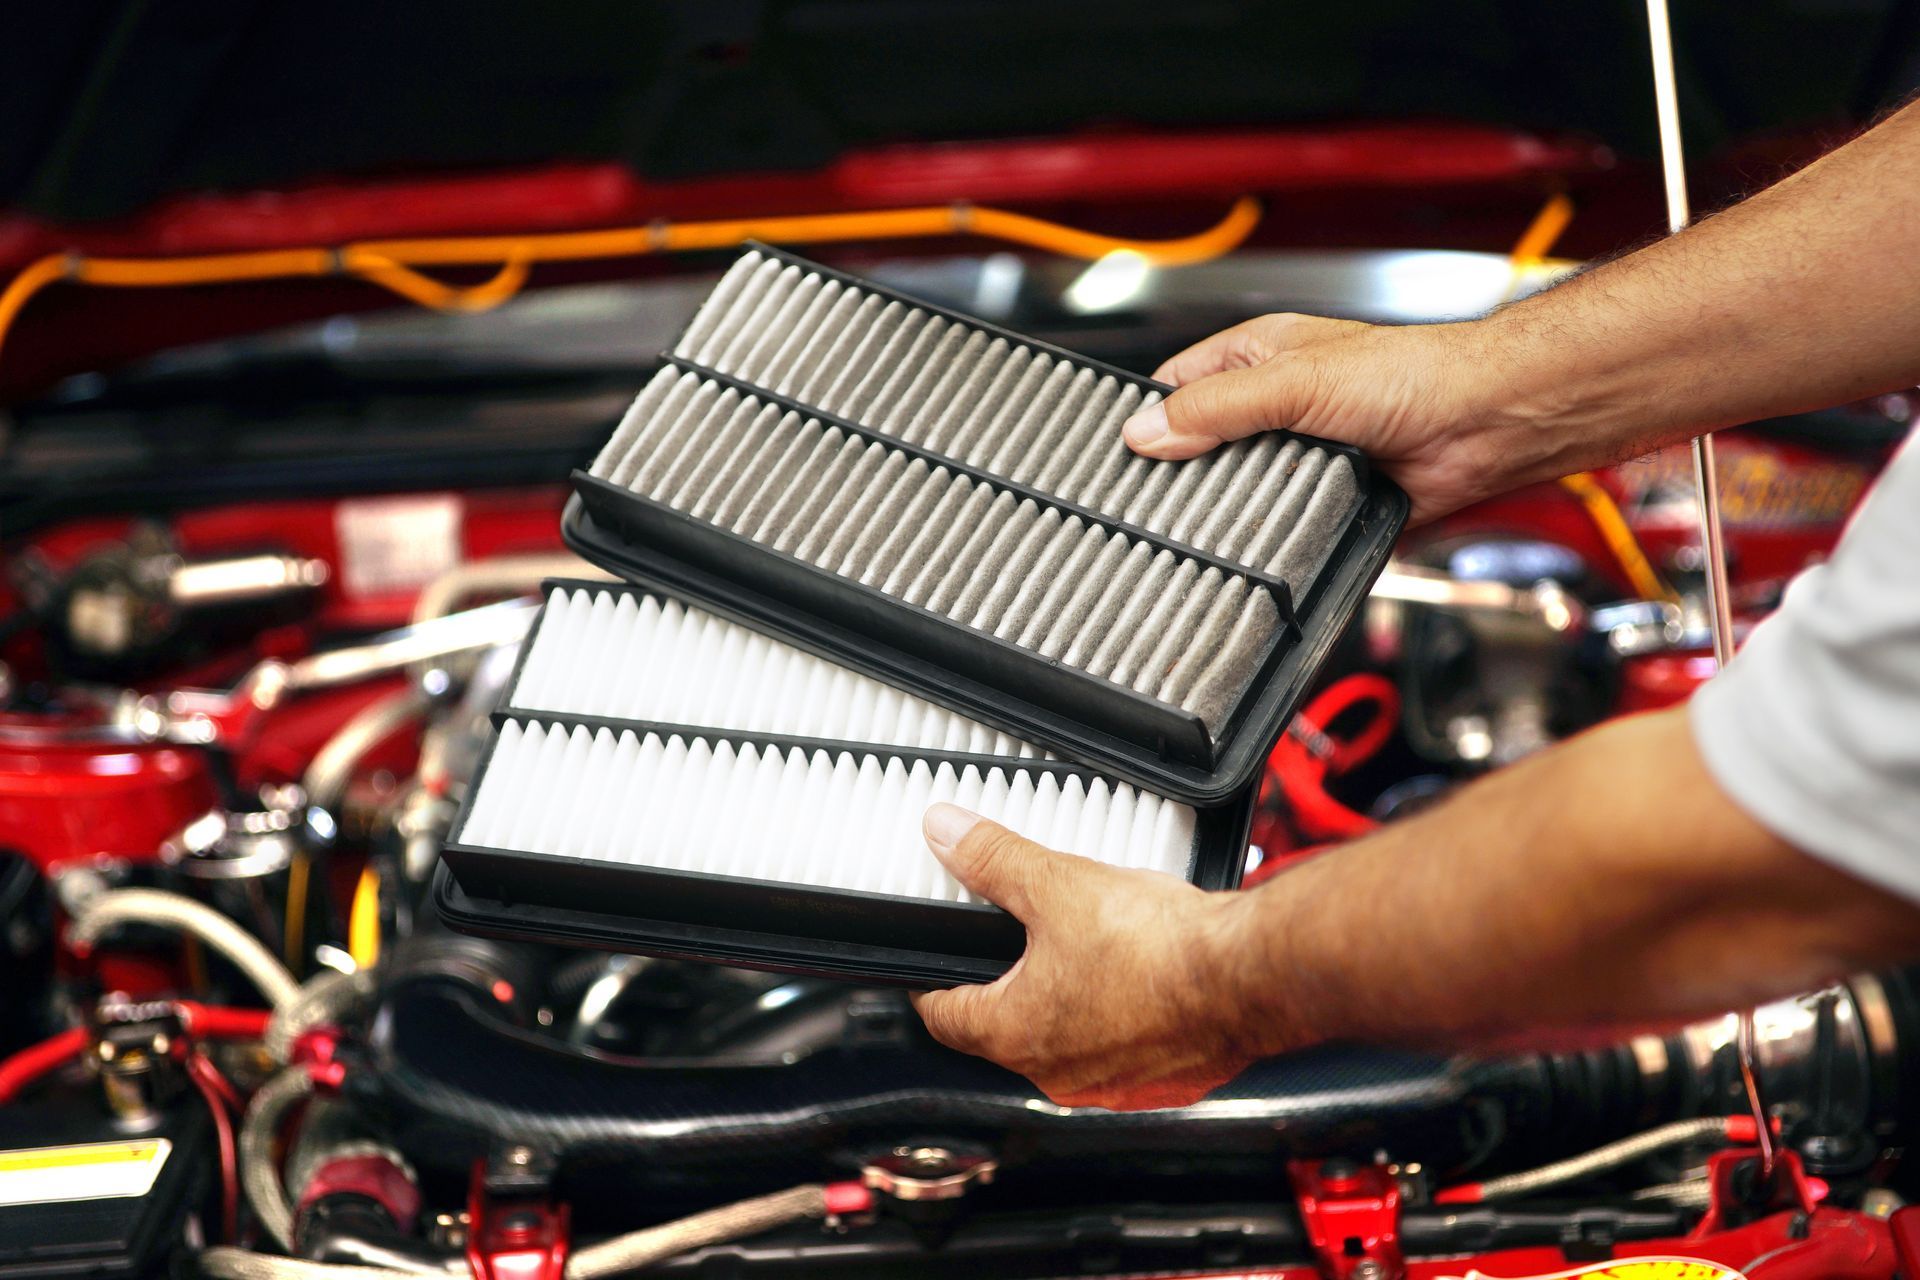 3 Things To Consider About Your Honda's Maintenance | Amigo Auto Repairs
